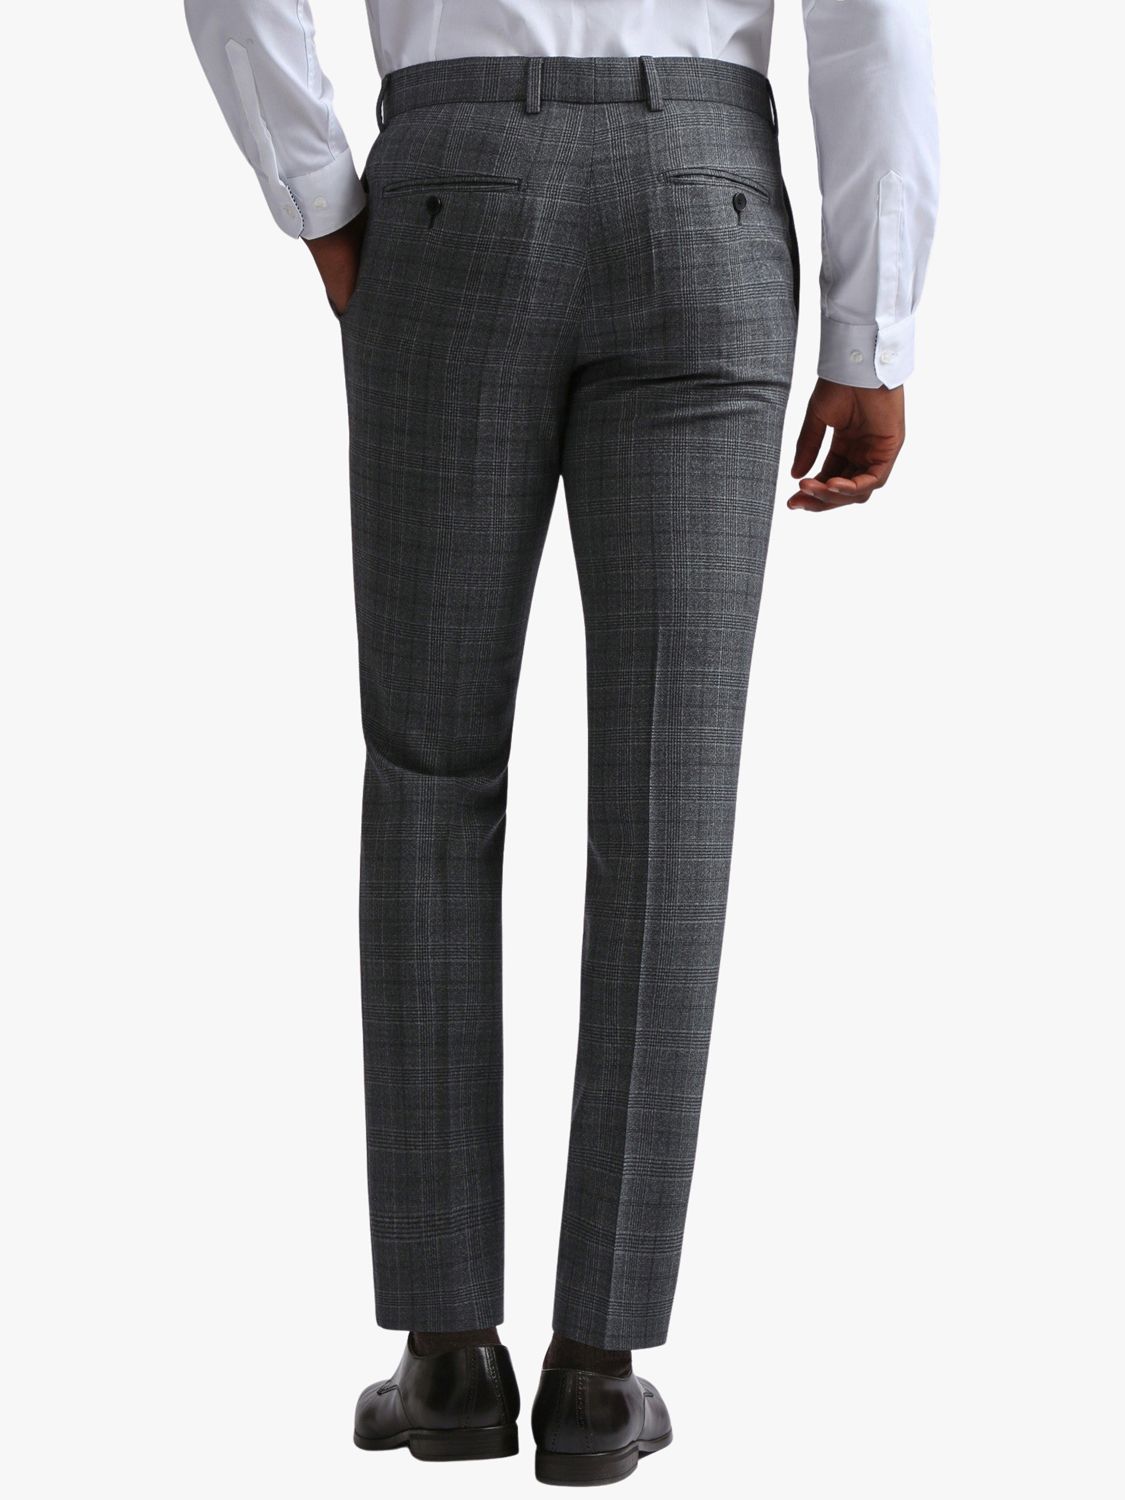 Ted Baker Zion Slim Fit Wool Trousers, Charcoal Check, 36L